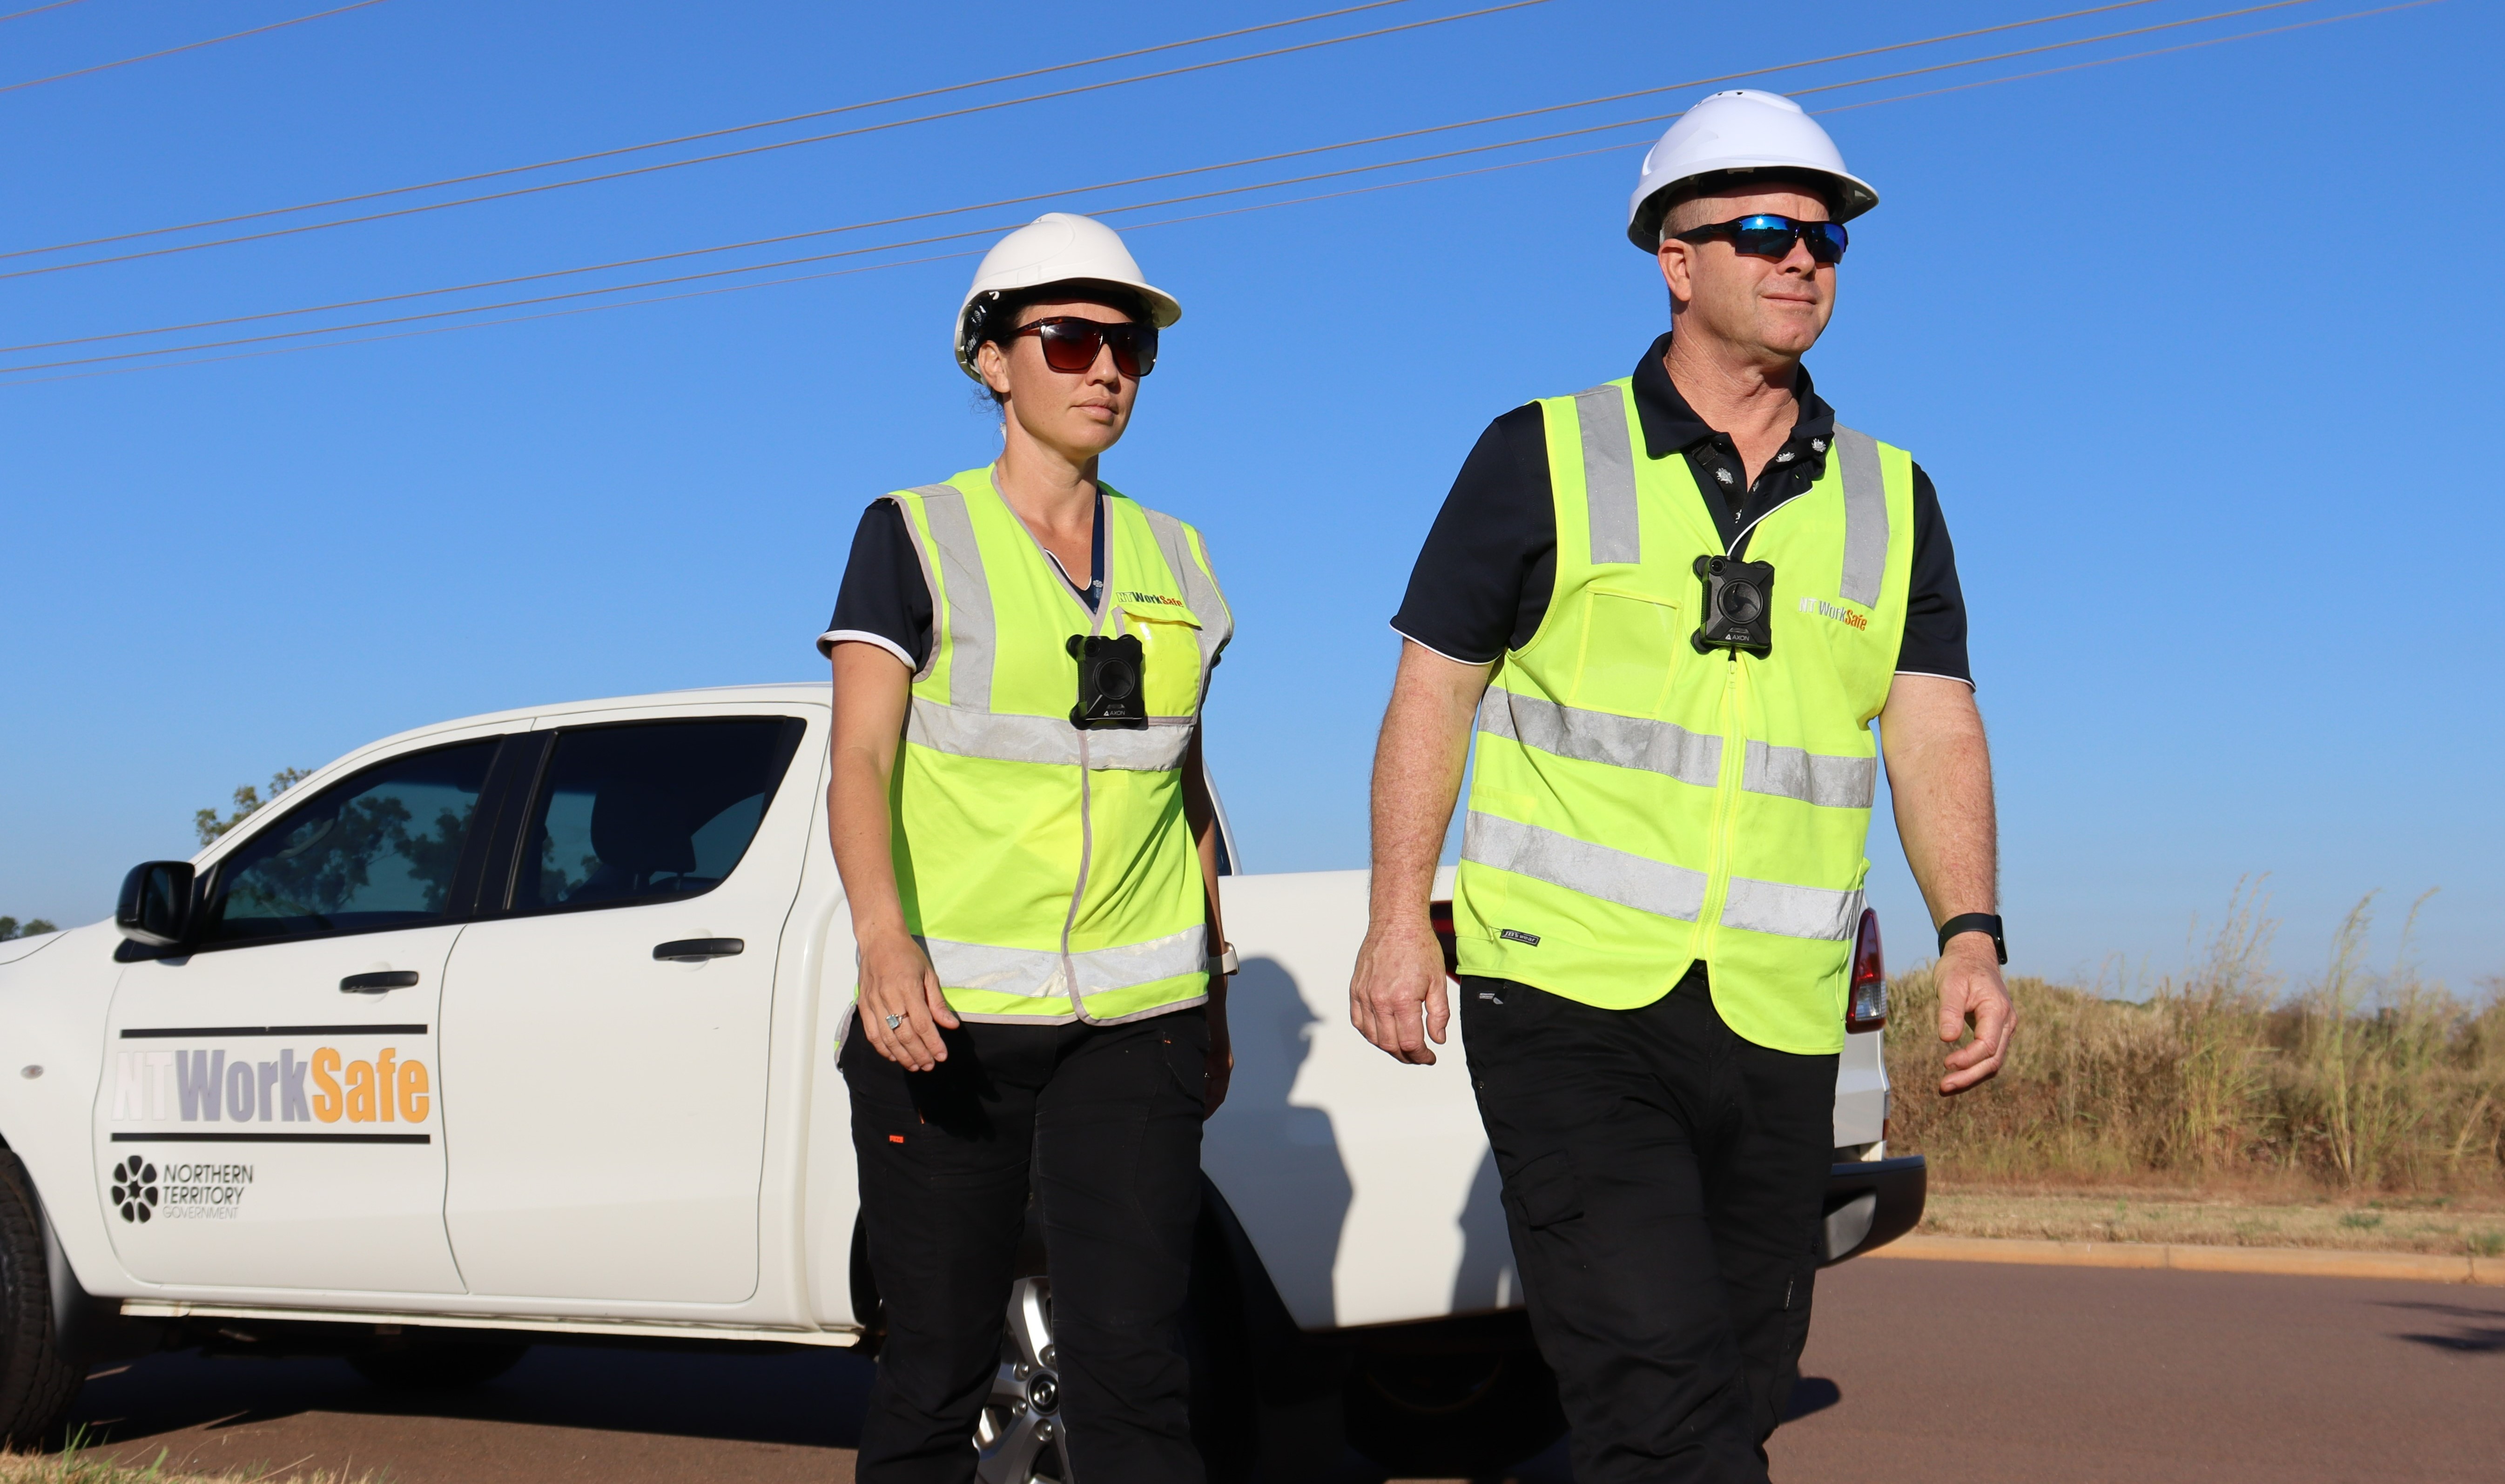 The photo shows NT WorkSafe inspectors wearing body worn camera as they conduct their workplace inspections.